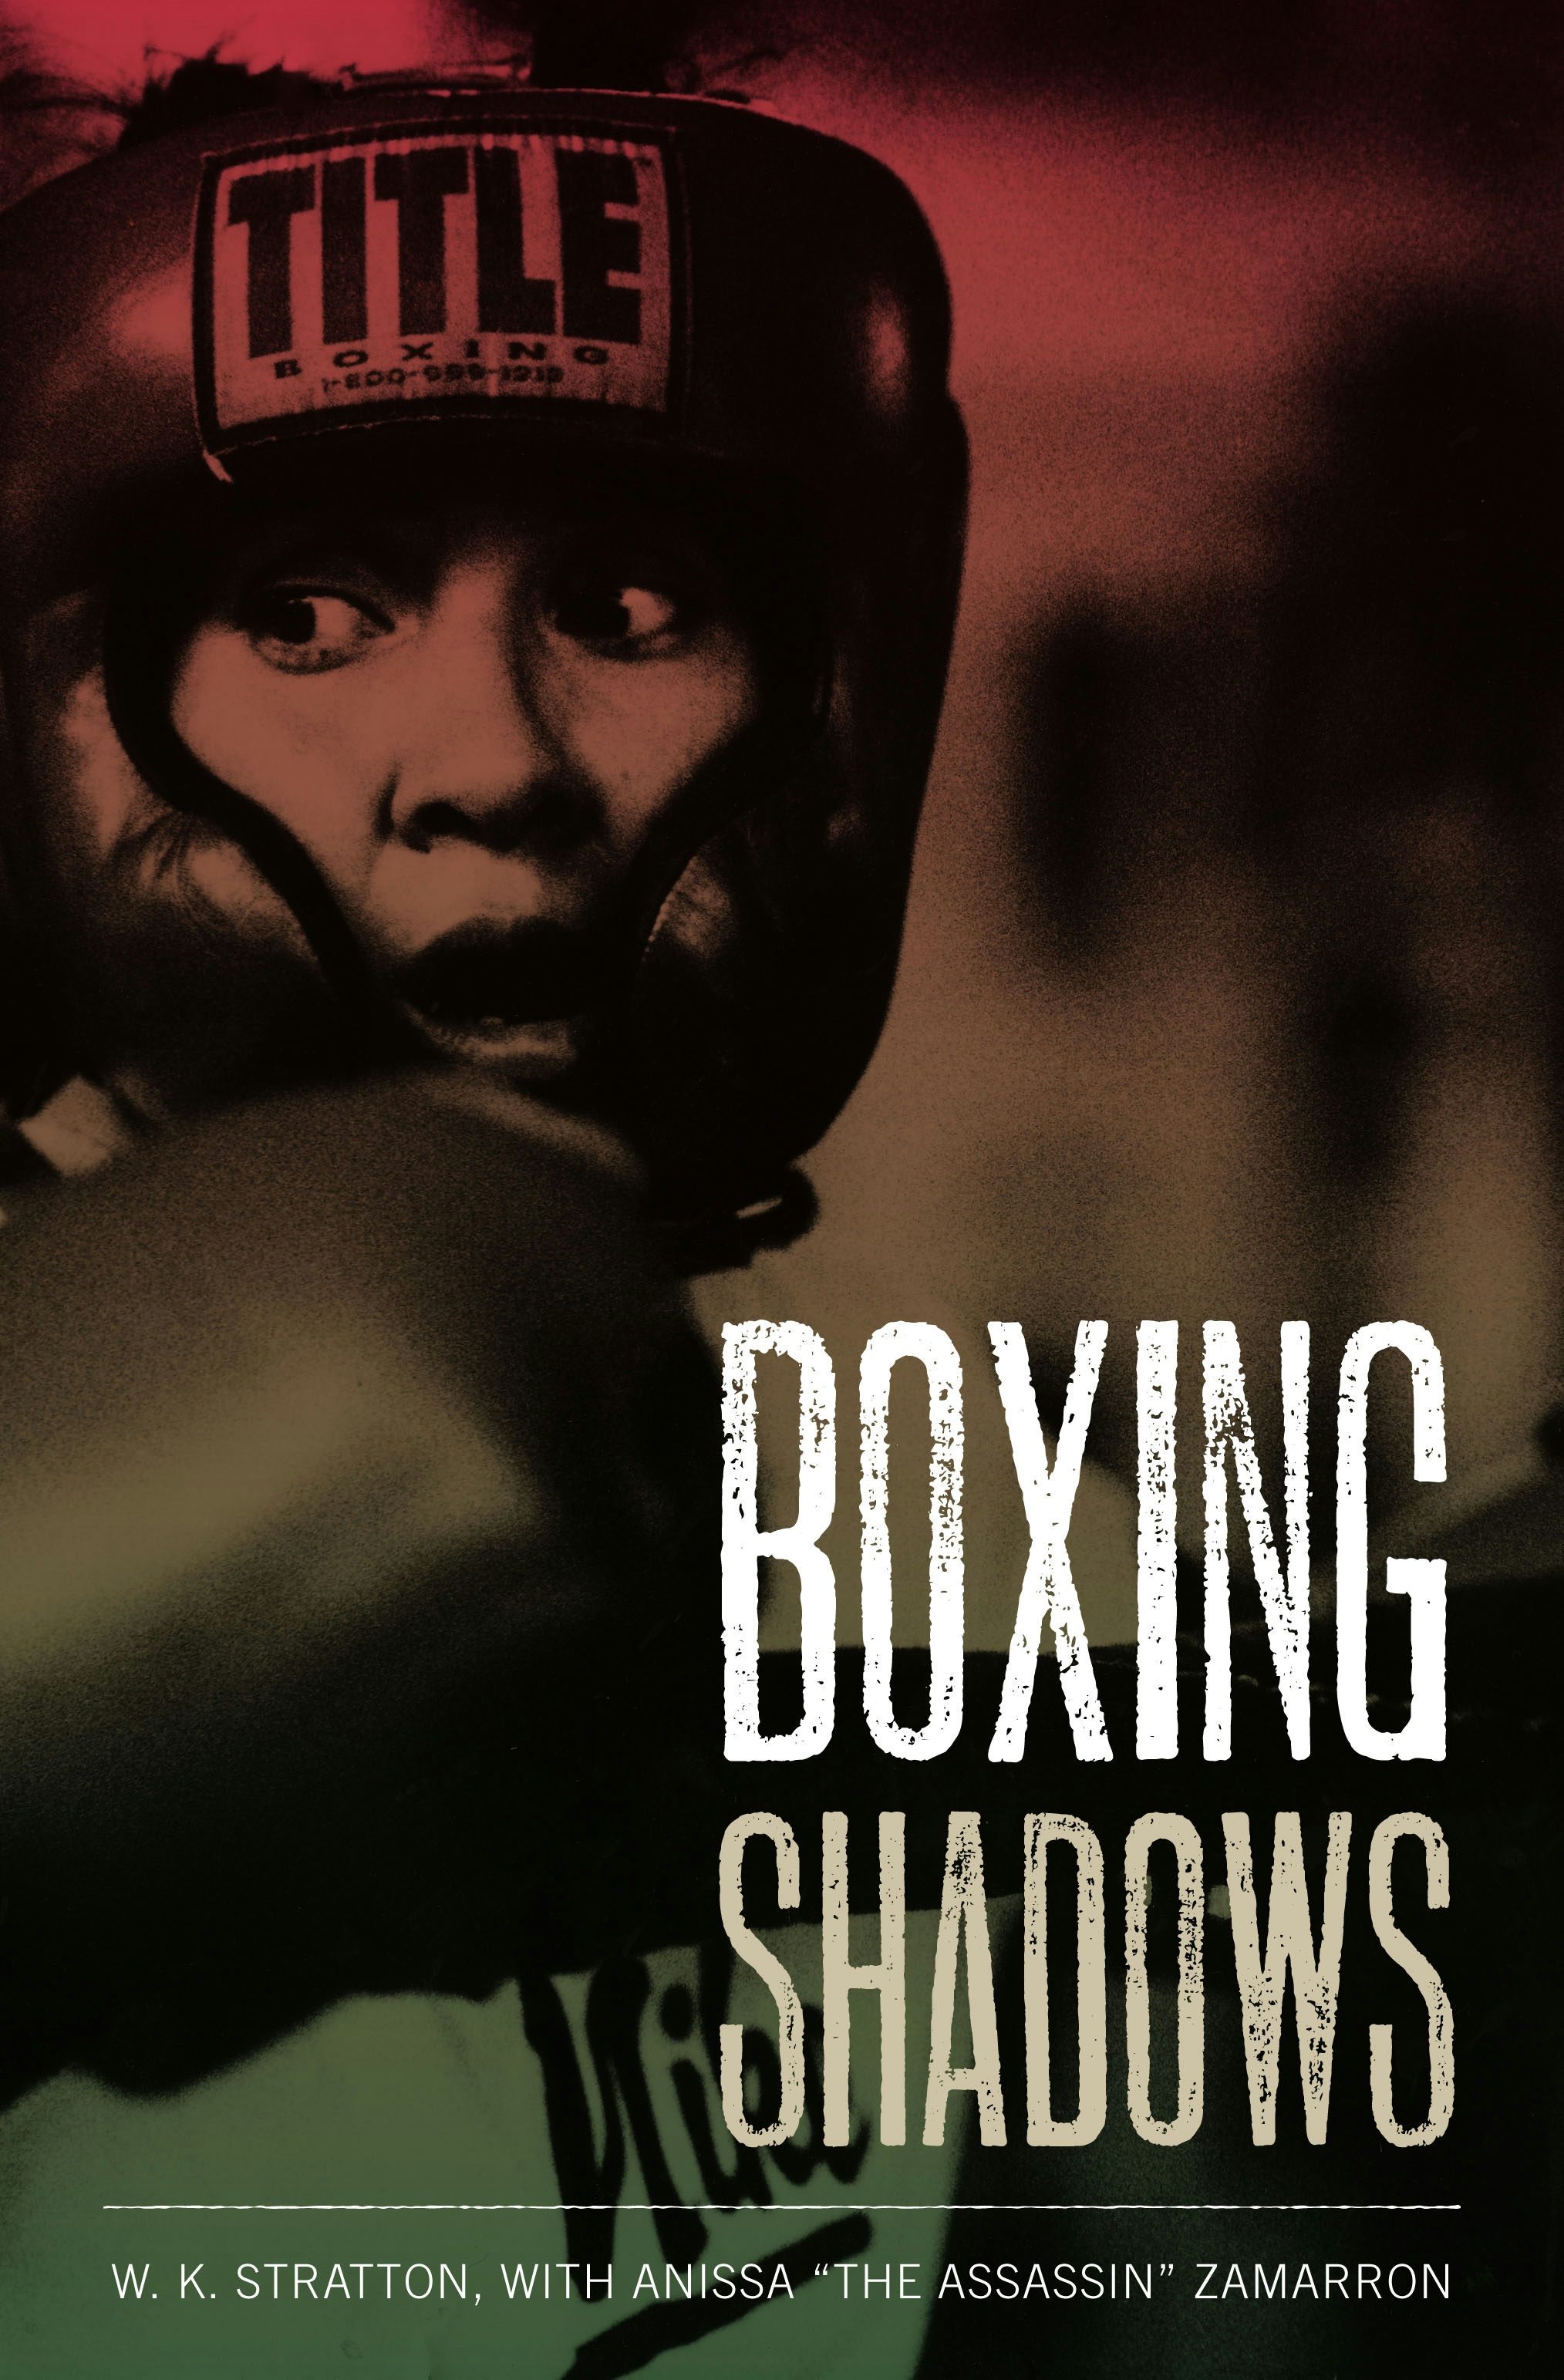 Are your students during the shadow boxing game? I